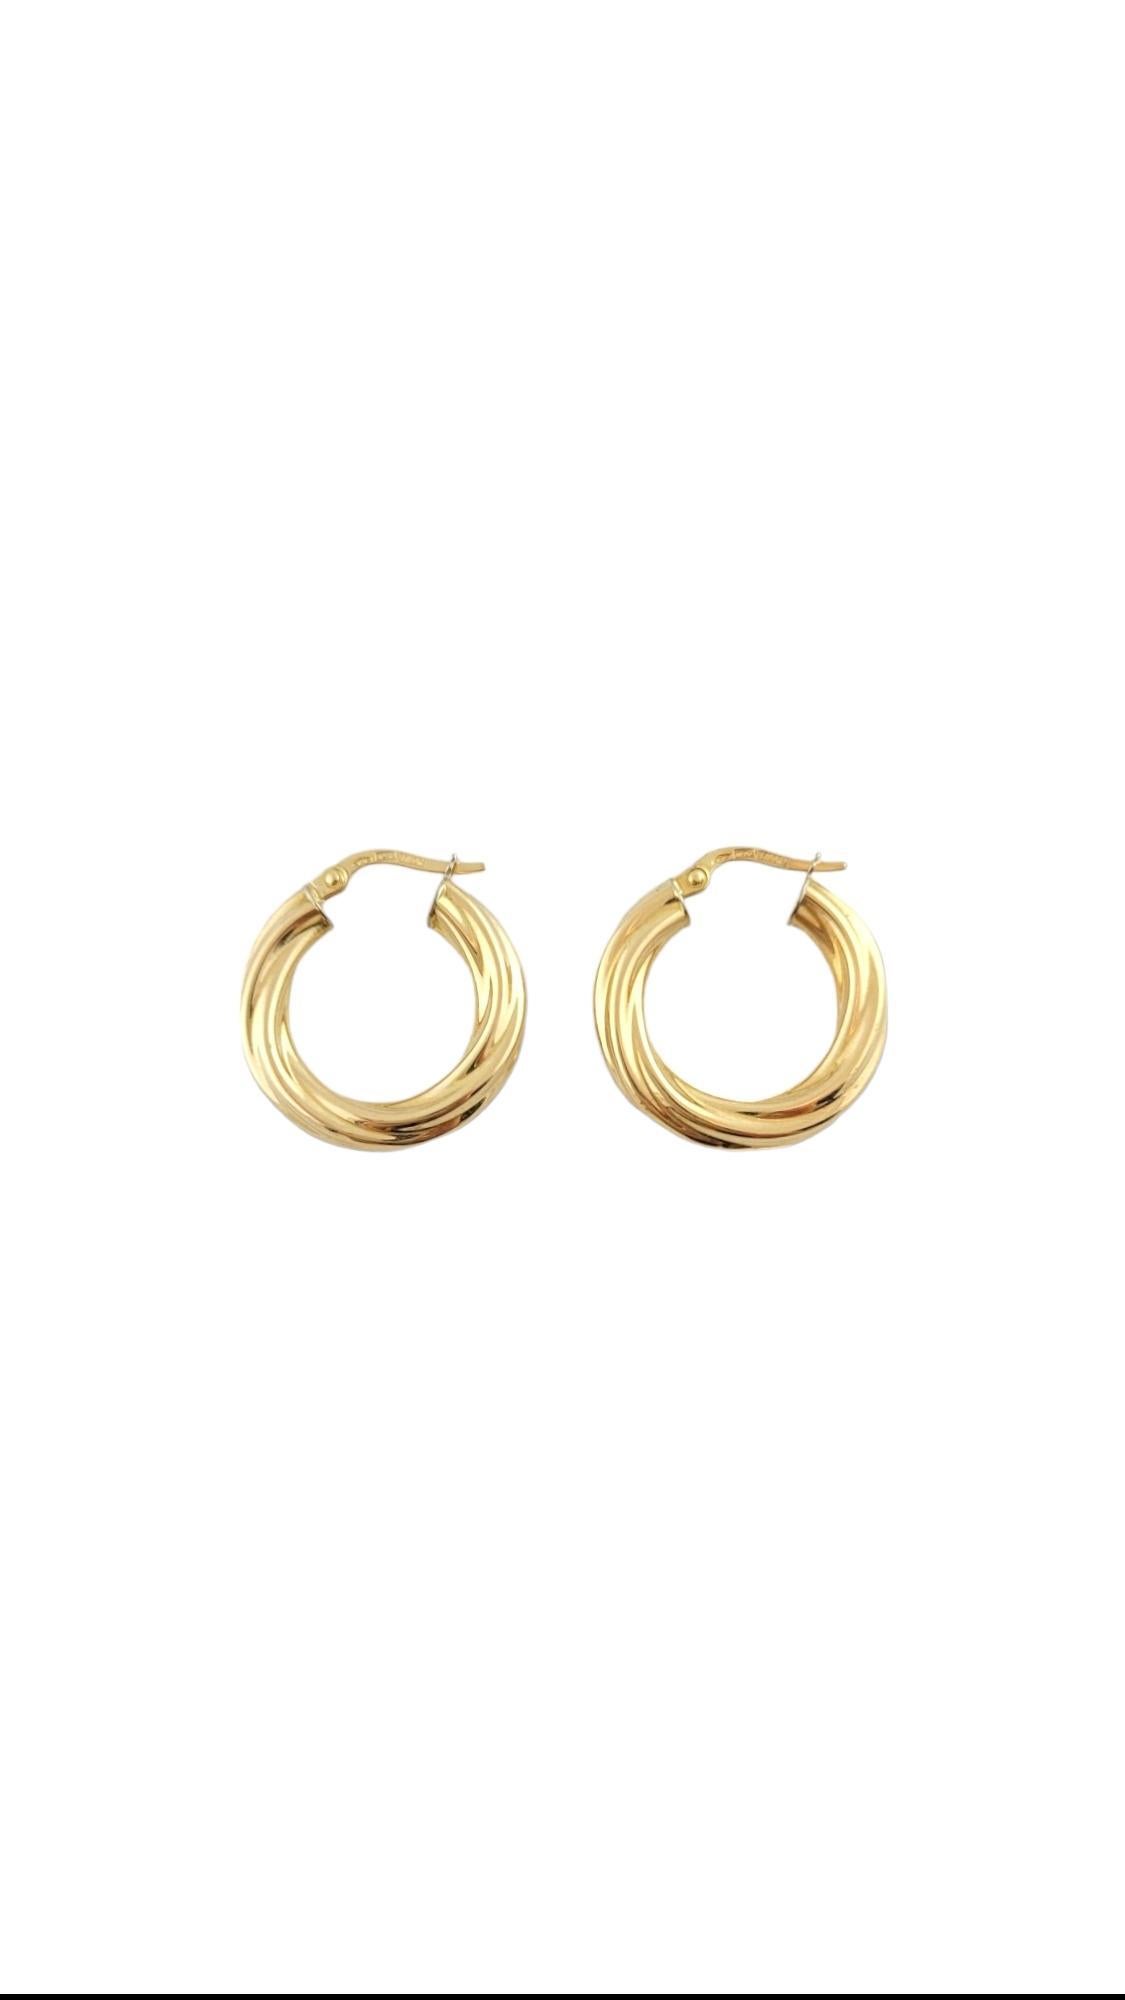 Vintage 18K Yellow Gold Twist Hoop Earrings

18 karat yellow gold hoop earrings with a twist design.

Weight: 1.4 dwt/ 2.2 g

Hallmark: 750 Italy Milor

Size: 23 mm X 21.9 mm/ 0.9 in X 0.86 in

Approximately 3.9 mm thick.

Very good condition,